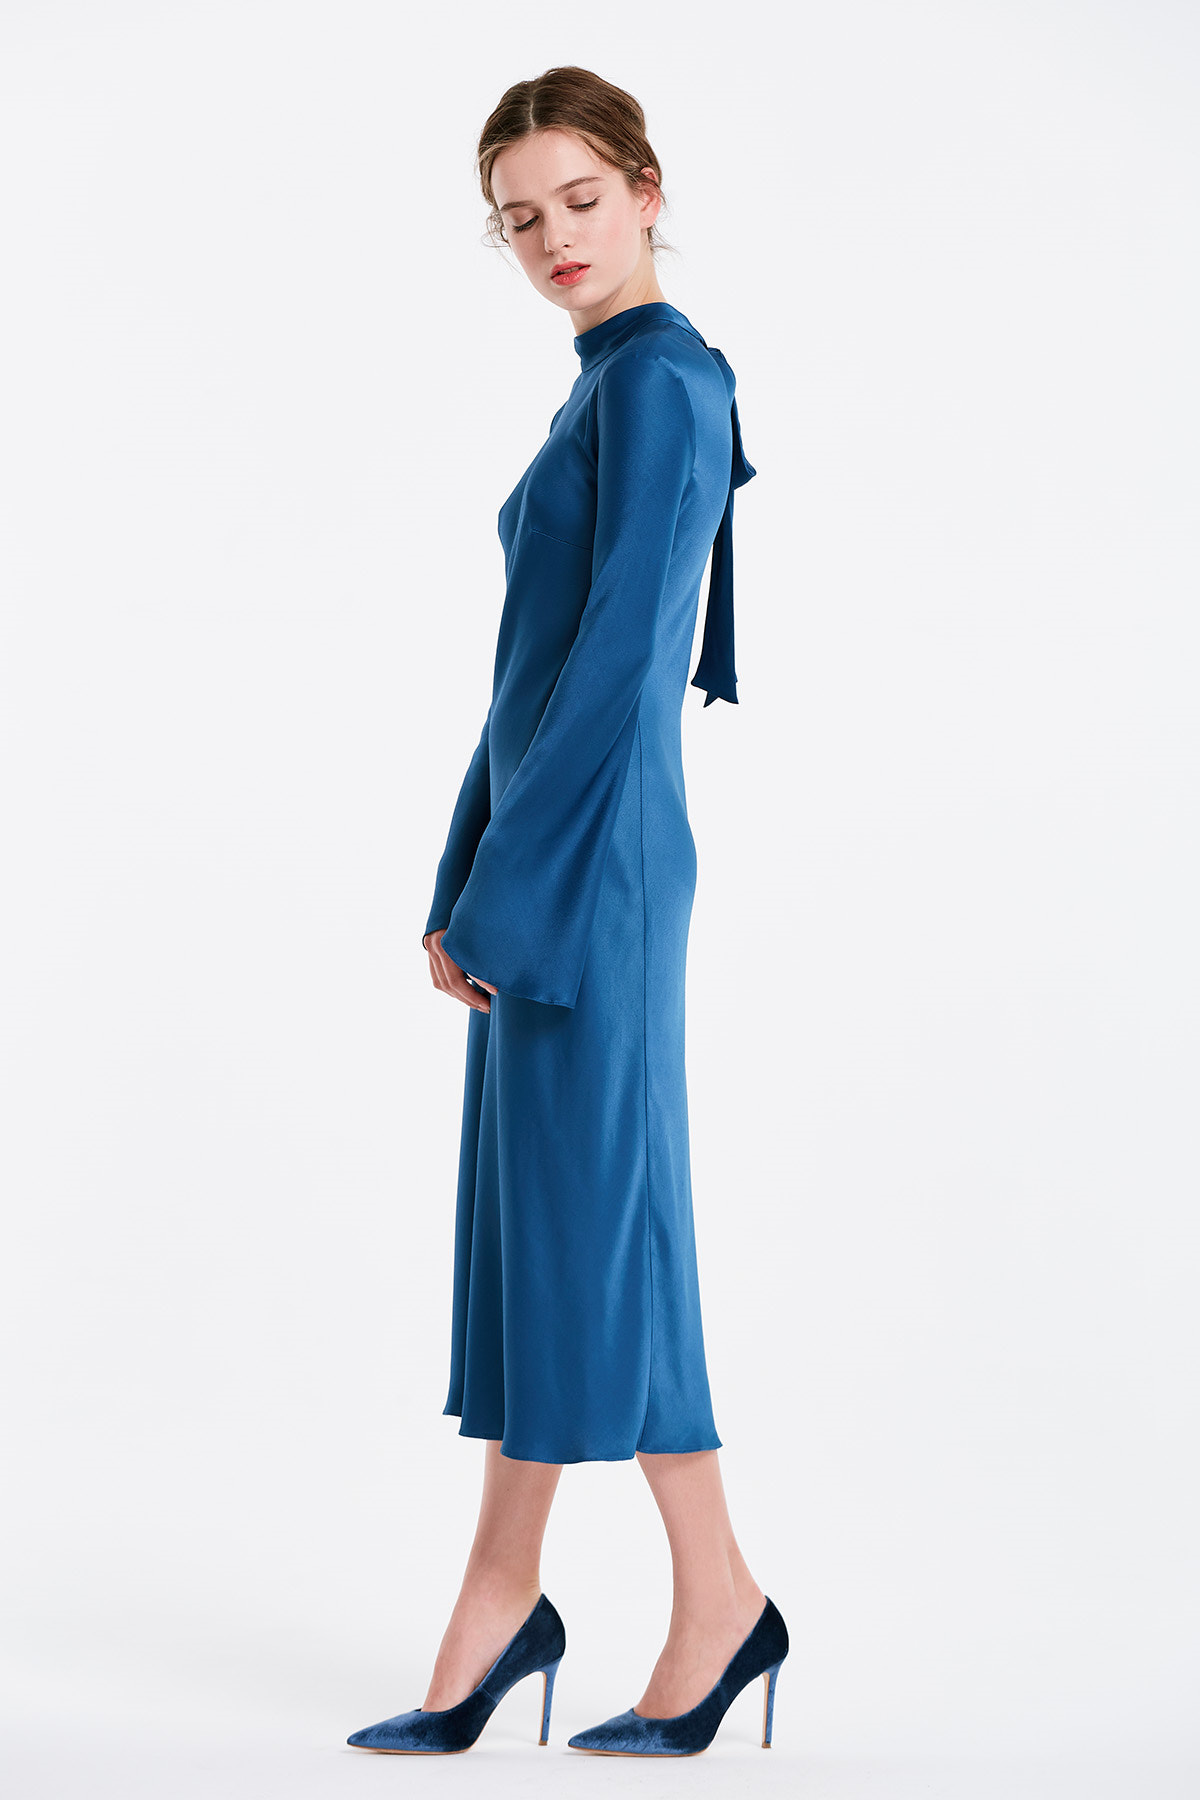 Blue dress with a bow at the back and flared sleeves, photo 4